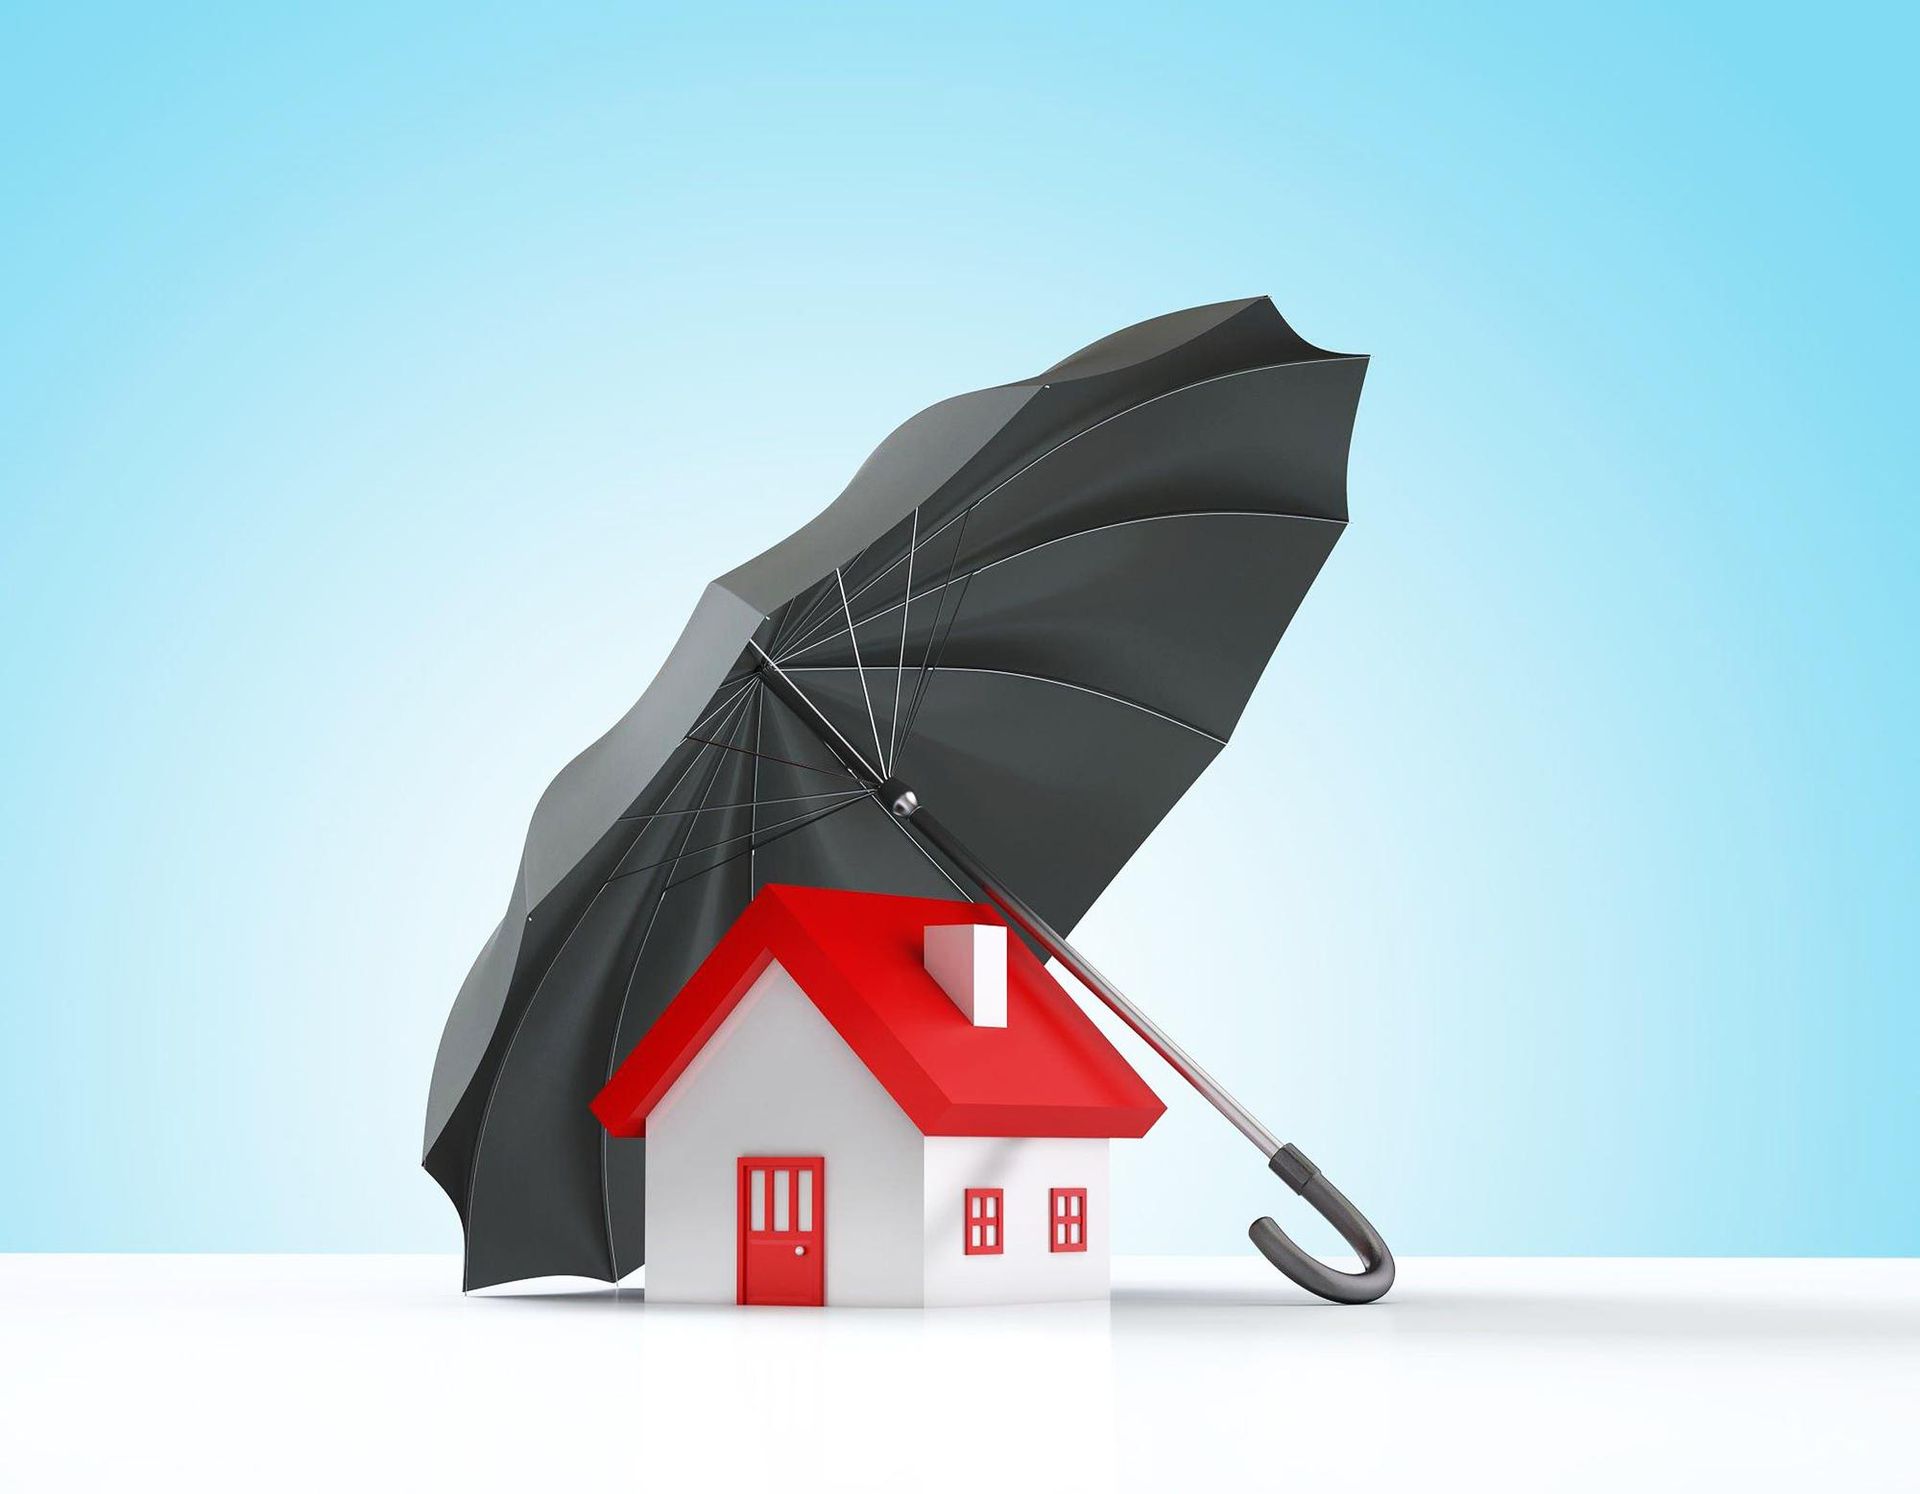 A small house with a red roof is covered by a black umbrella.